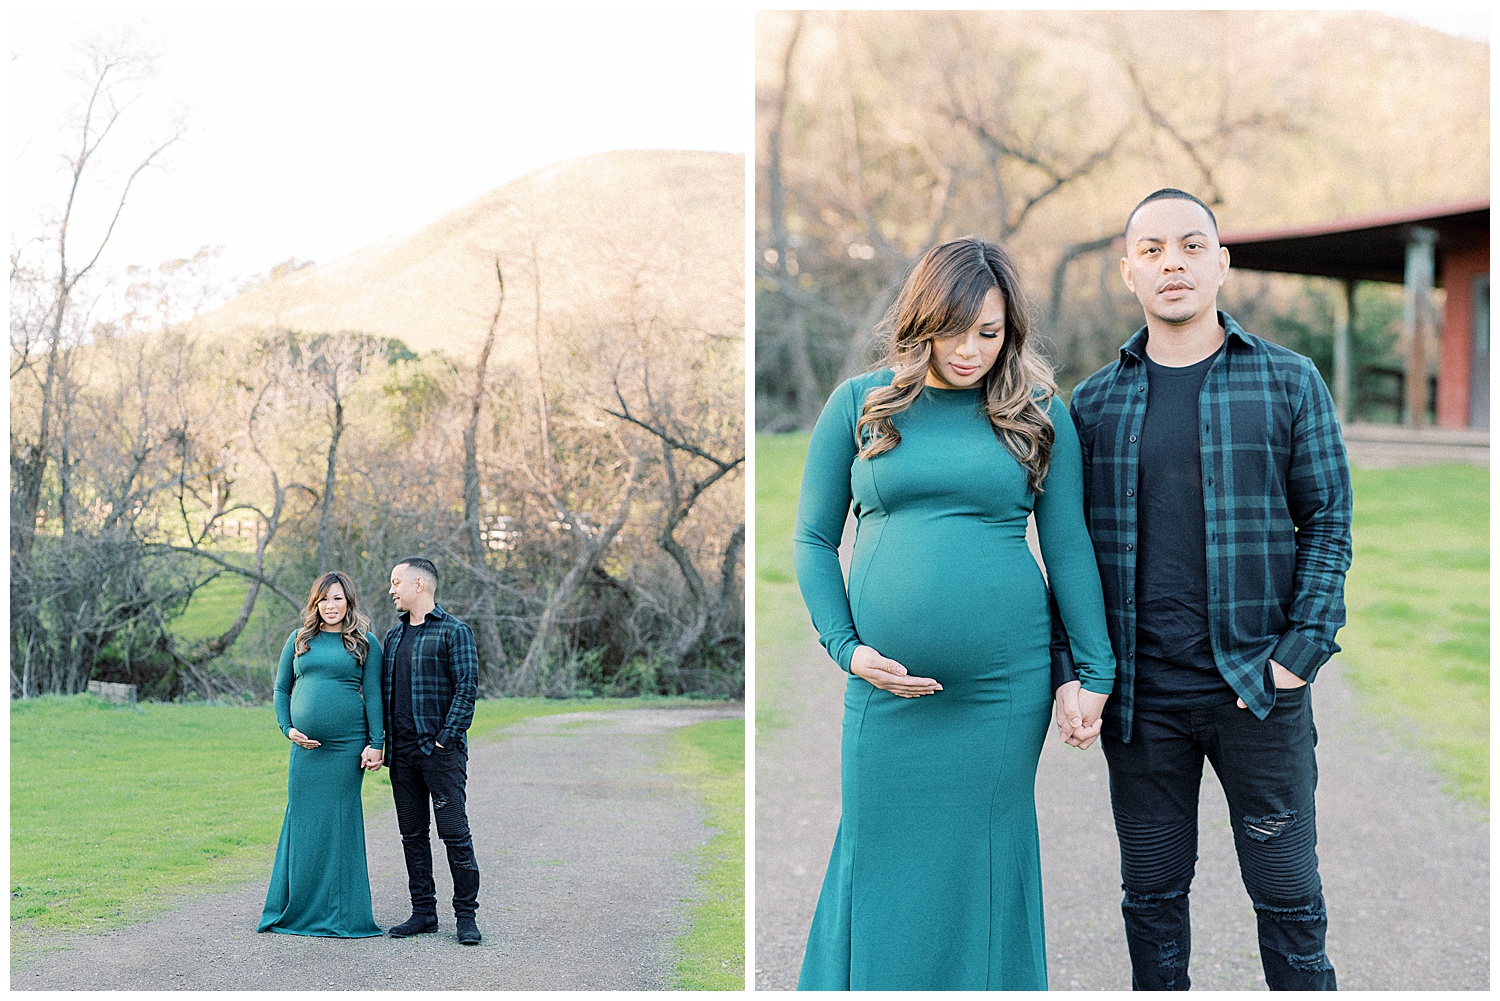 san francisco wedding and portrait photographer doing a maternity session in garin park fremont california, 